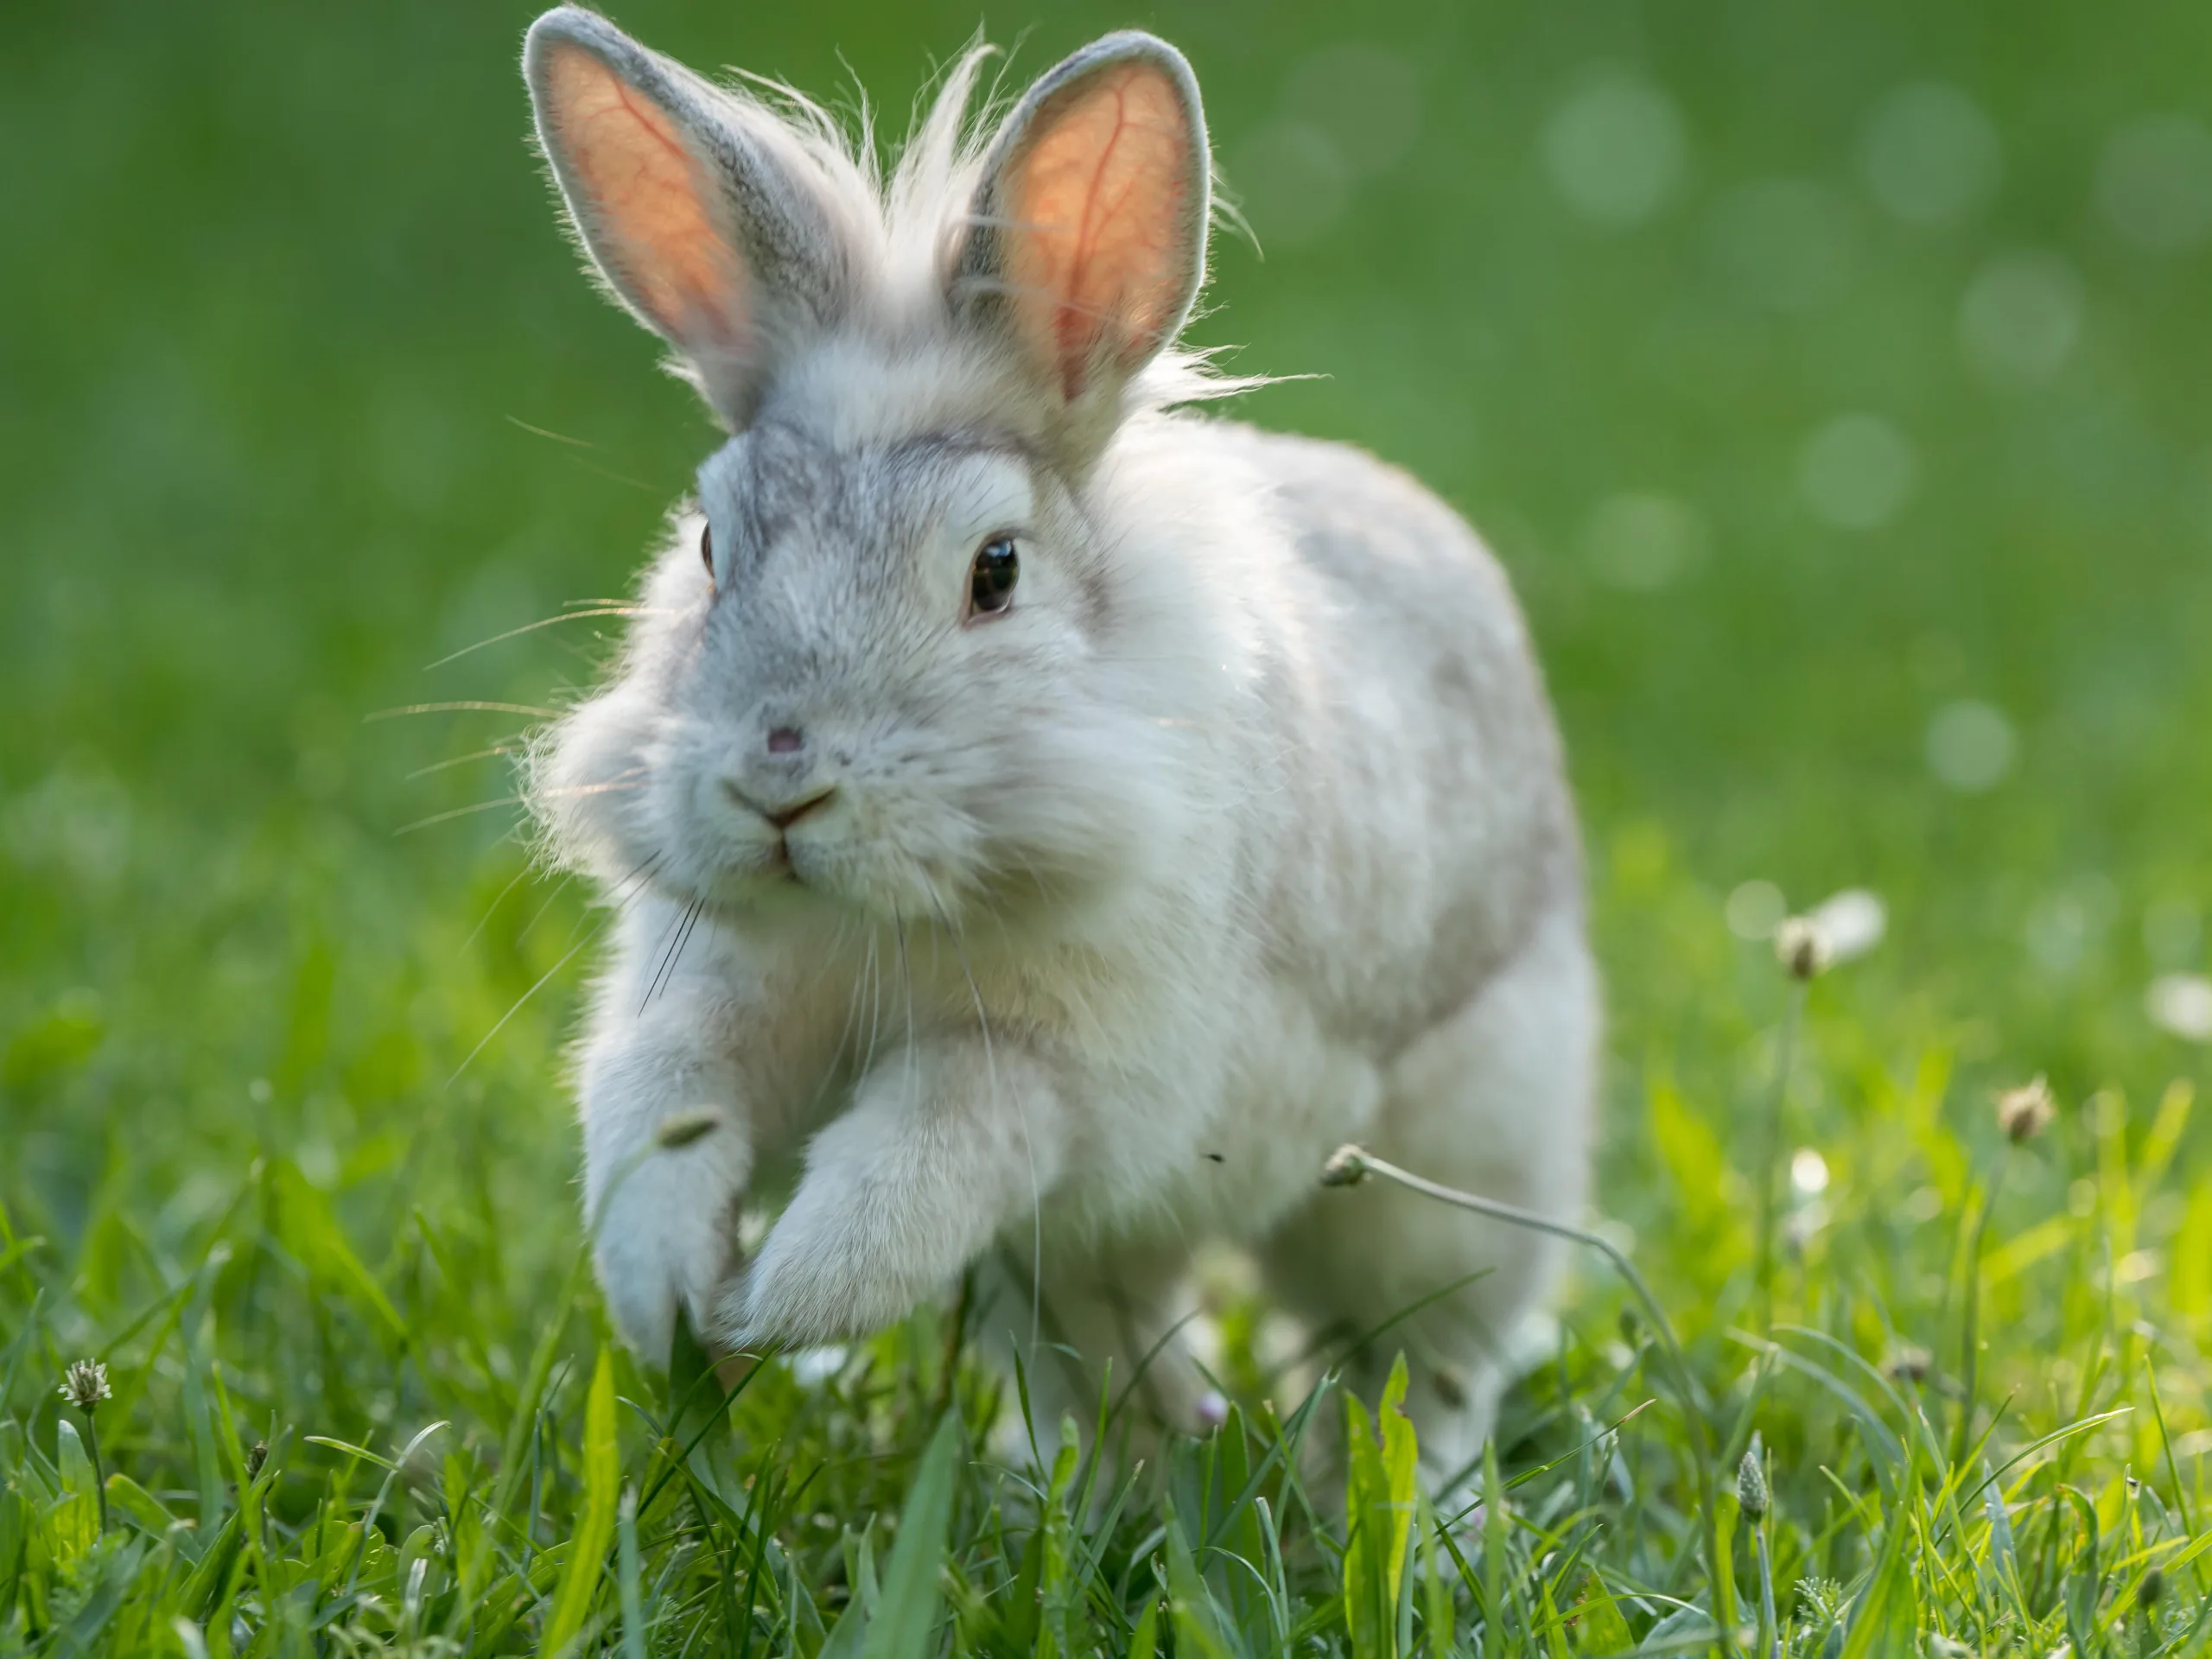 A photograph of a white and grey bunny hopping in green grass